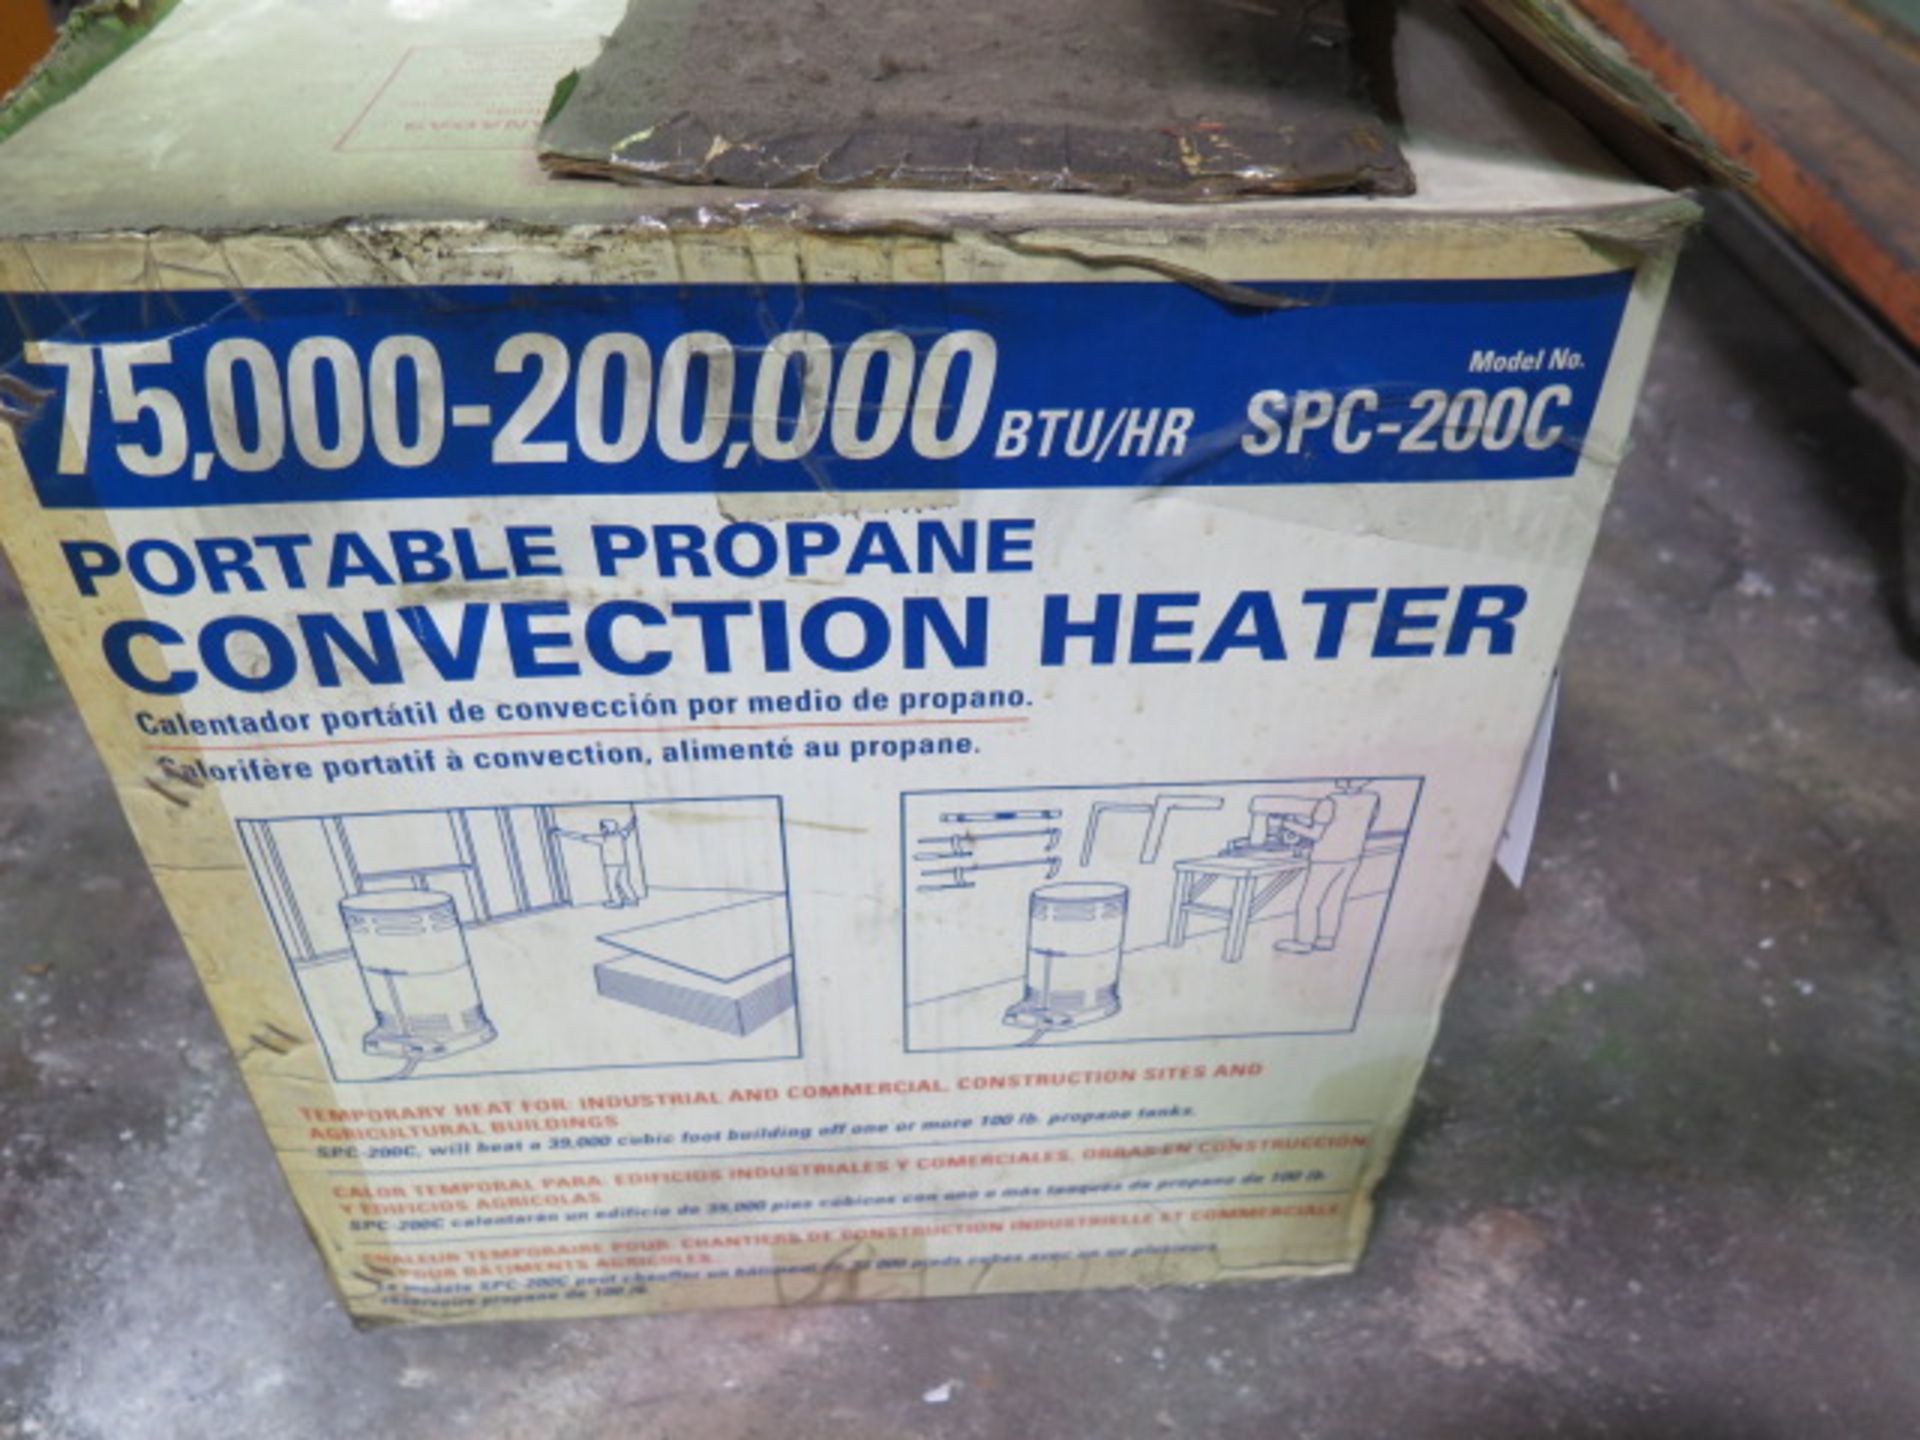 Portable Propane Convectin Heater (SOLD AS-IS - NO WARRANTY) - Image 2 of 4